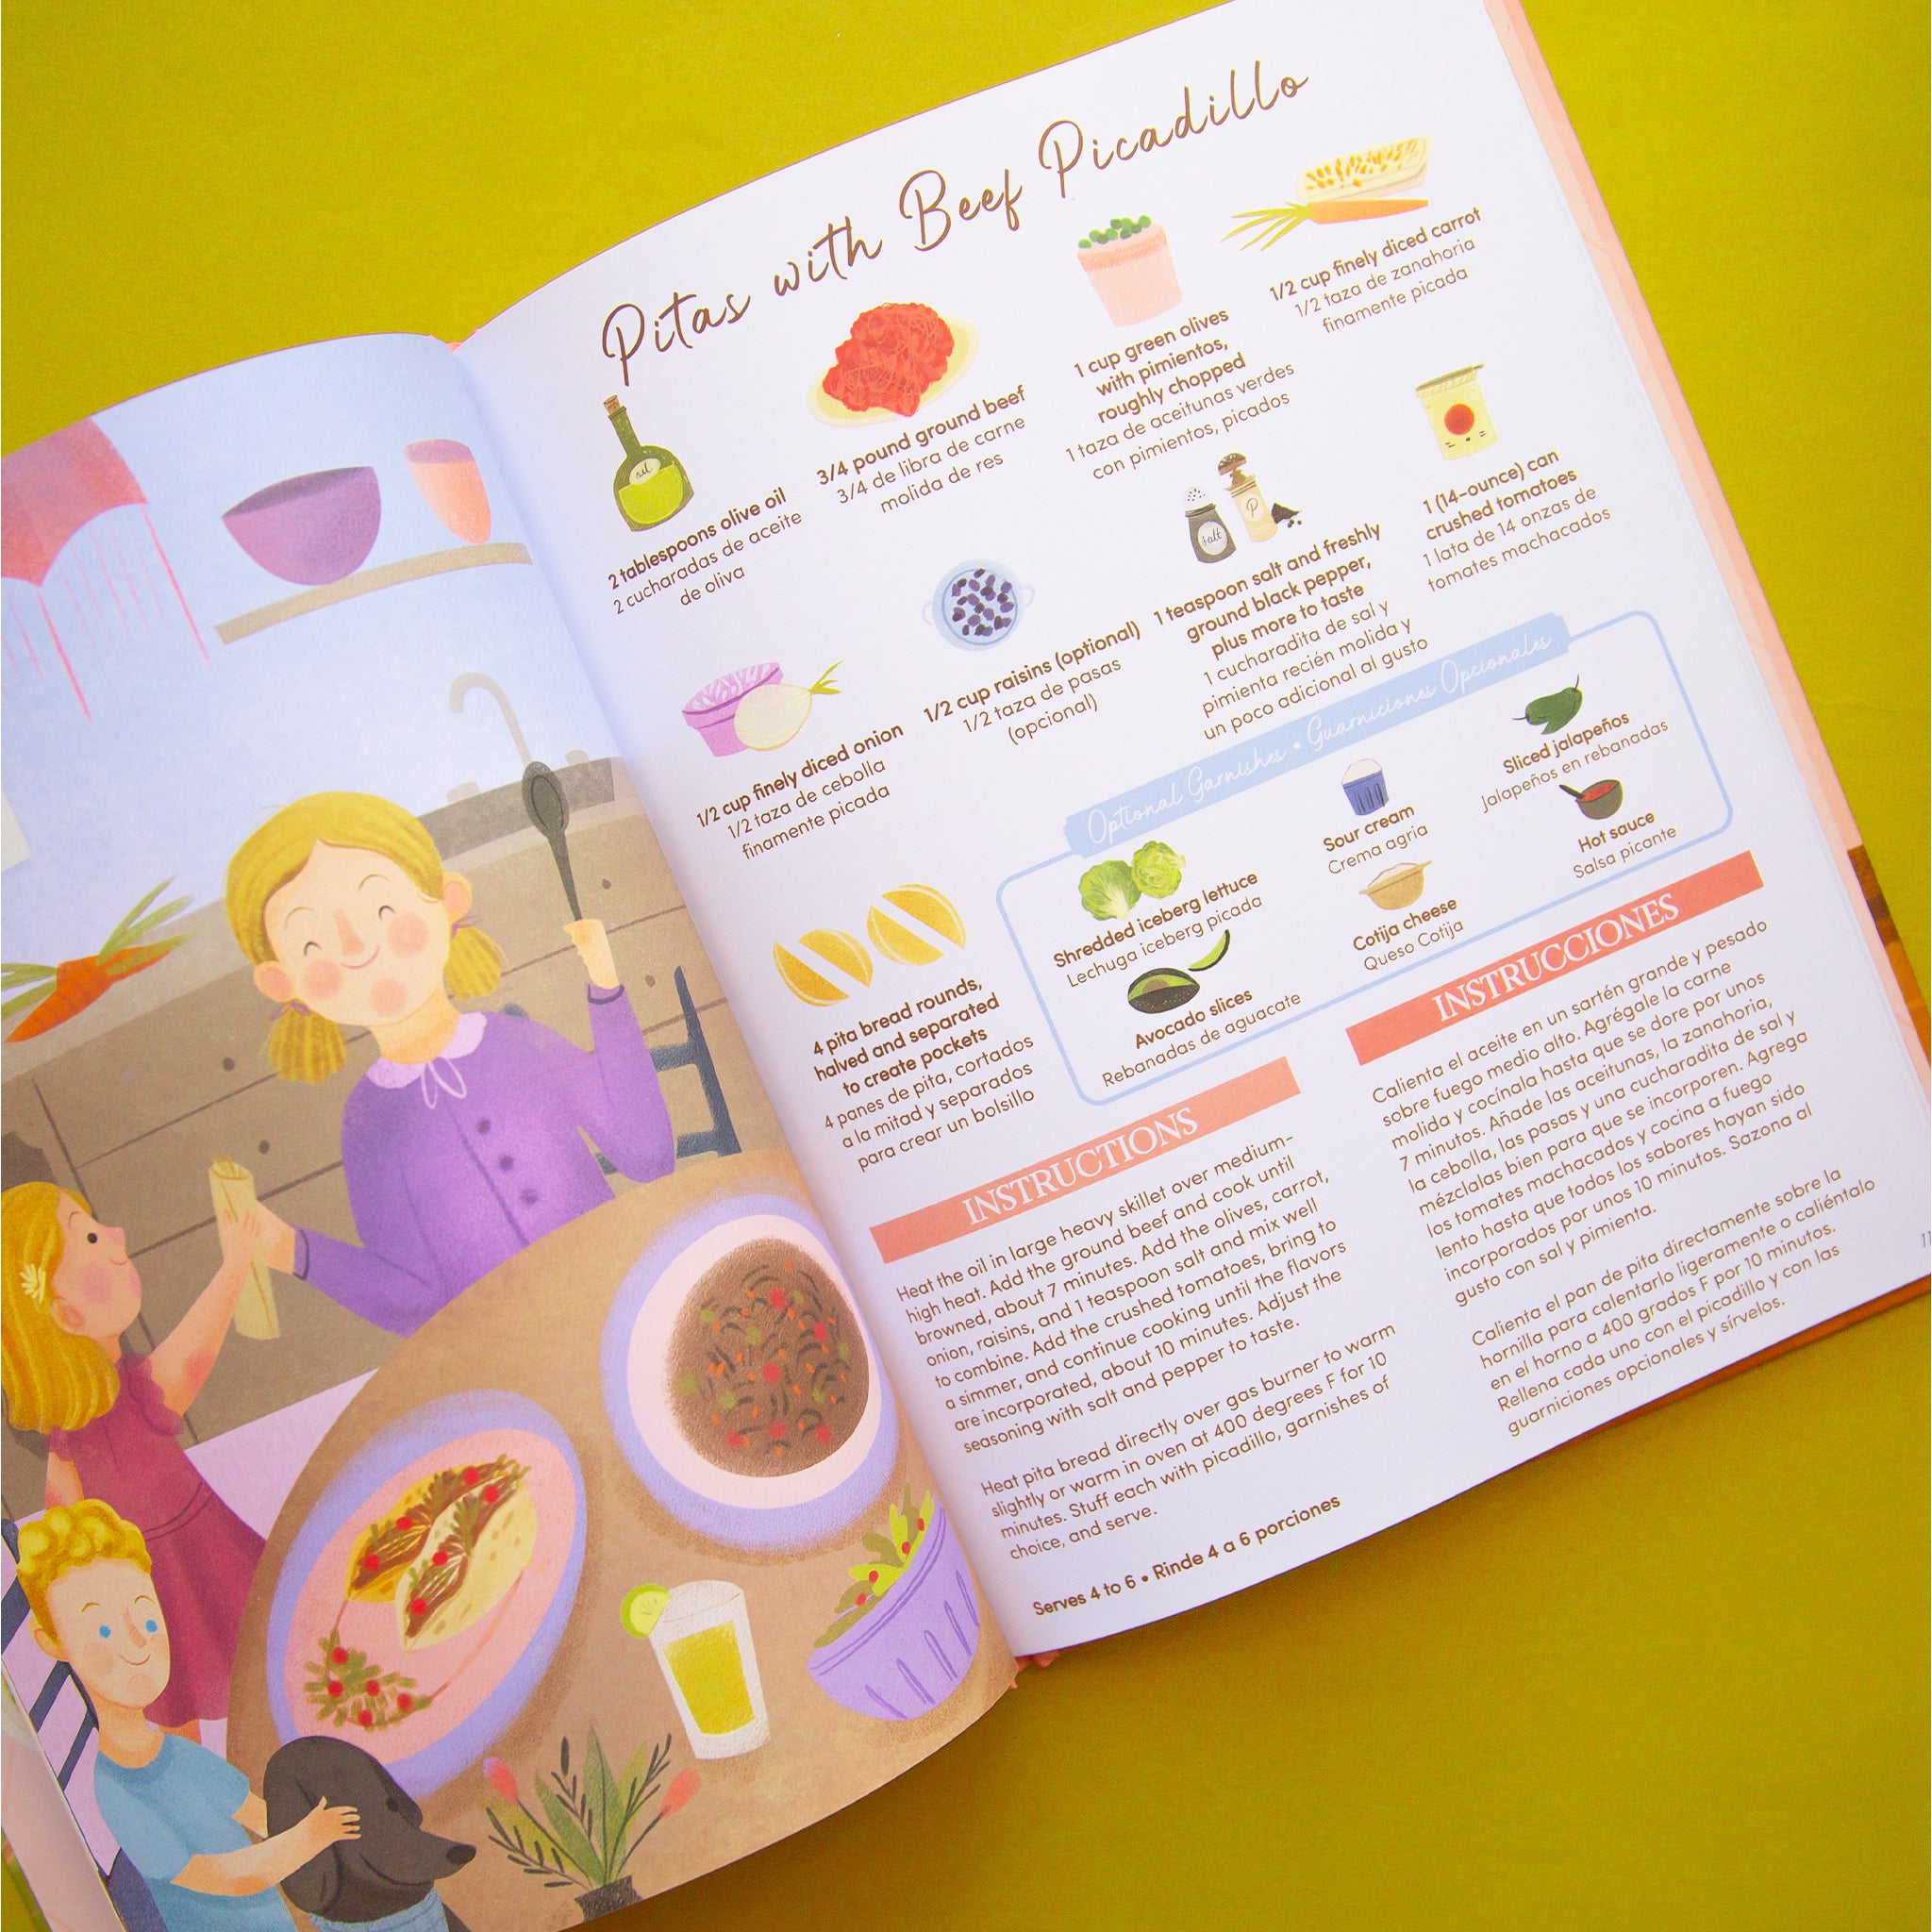 On a green background is the book open to a page containing a recipe with illustrations above each step and a colorful illustration on the left hand page. 